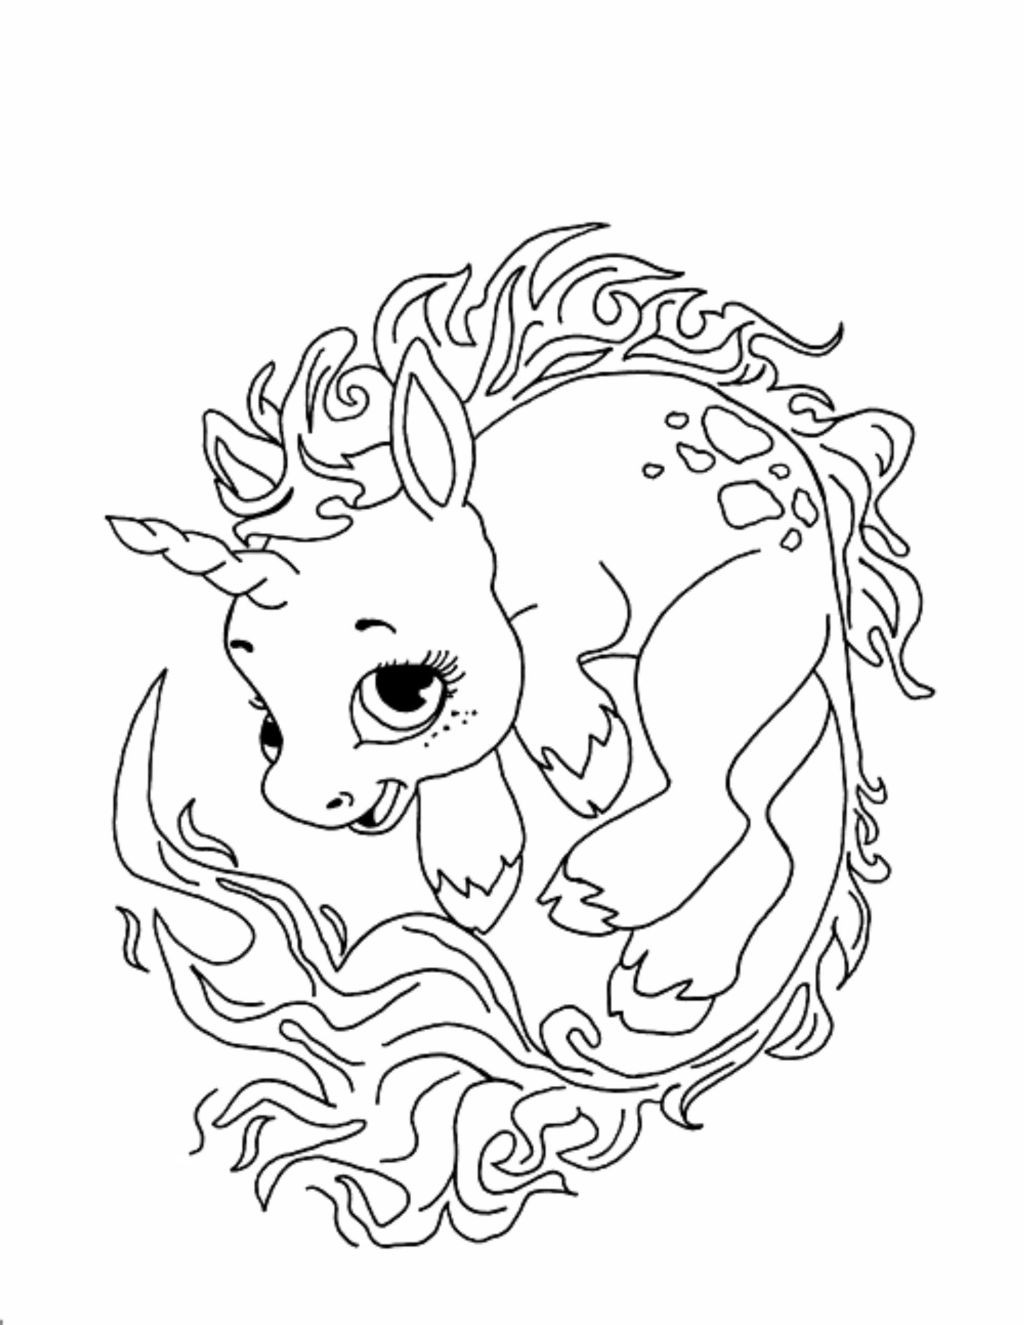 Coloring Pages Of Cute Baby Unicorns
 Cute Unicorn Coloring Pages at GetDrawings